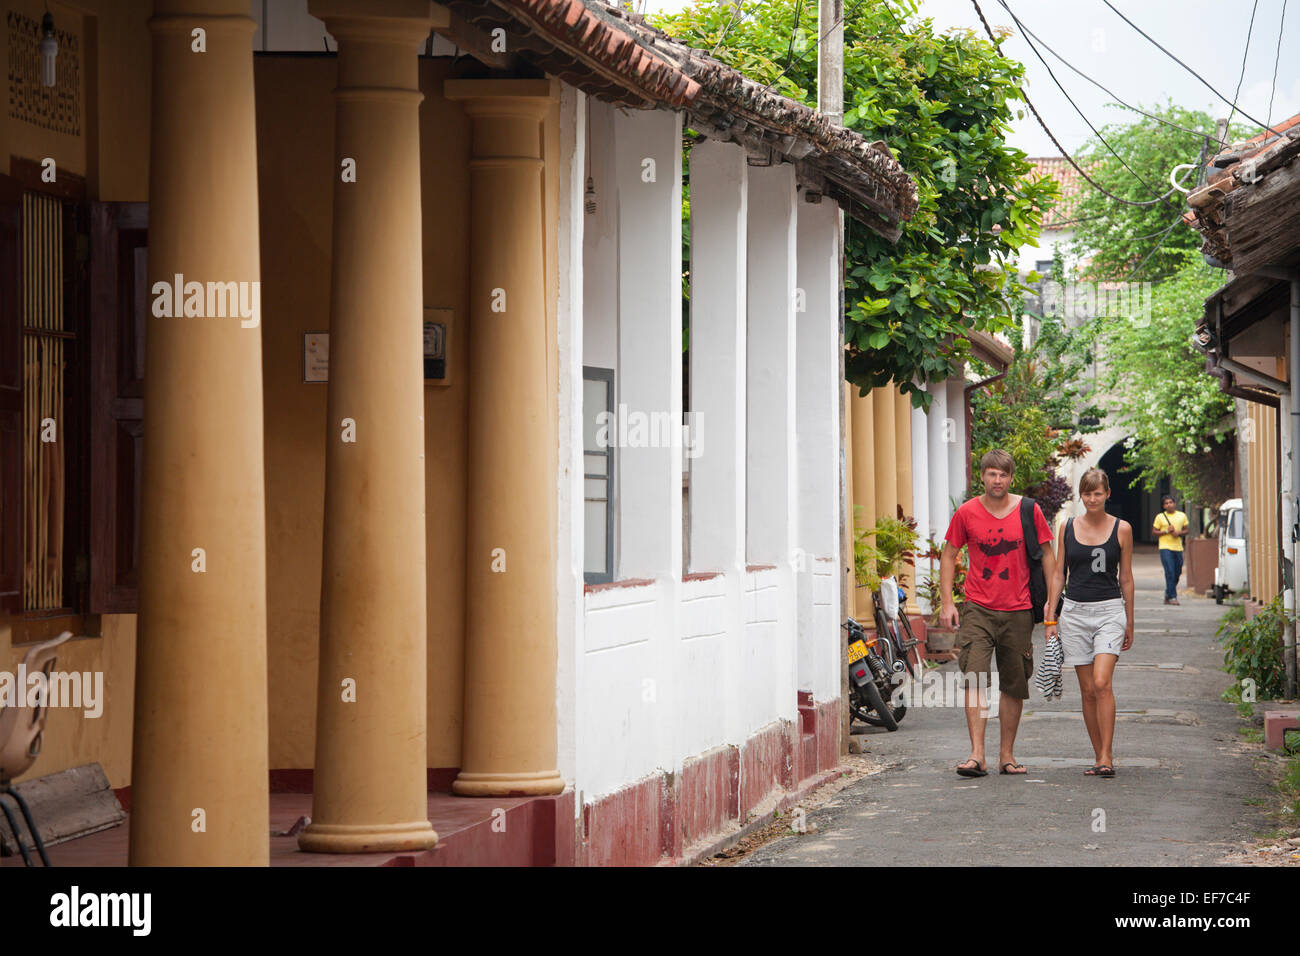 TOURISTS WALKING IN COLONIAL STREET IN GALLE FORT Stock Photo